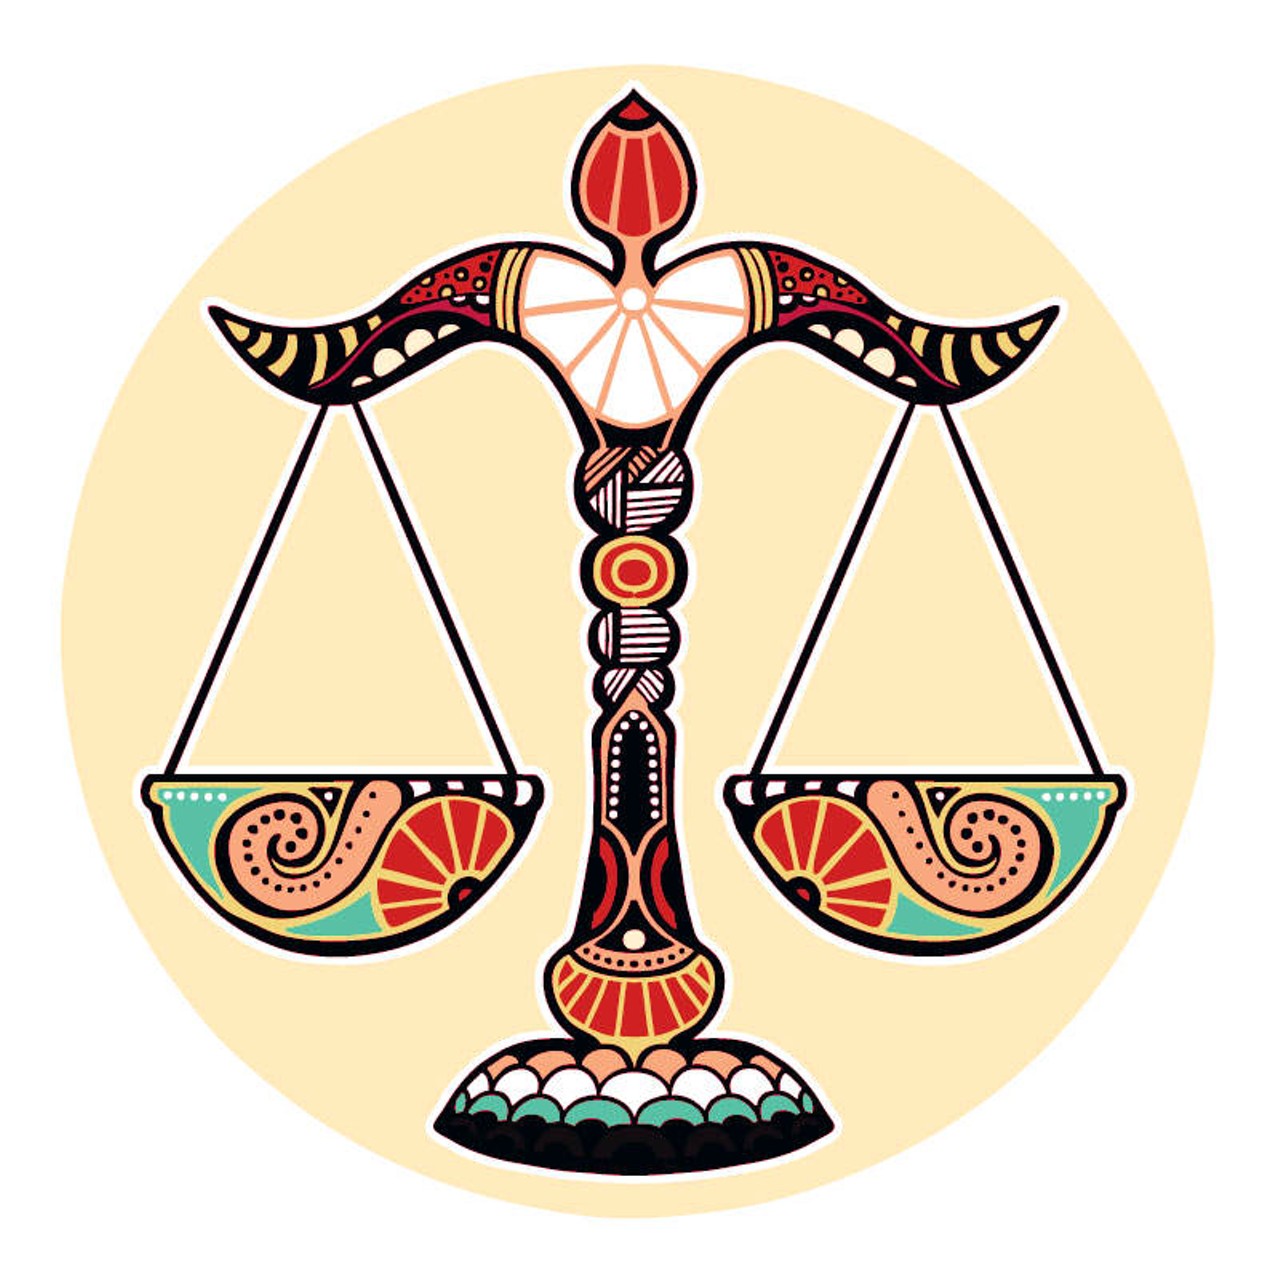 LIBRA (Sept. 21-Oct. 20): The way things are coming together, you're a far cry from where you were at a year ago. Give everyone time to catch up with you. The next few weeks will see you sitting on the edge of choices that will not be 100 percent clear until the end of the month. Those closest to you aren't on the same page. That doesn't have to be a problem. It would be nuts to expect anyone to get where you're coming from, and vice-versa. Following your own thread, knowing that everyone has their own row to hoe, will ease you through this transition and make it possible to keep the peace.